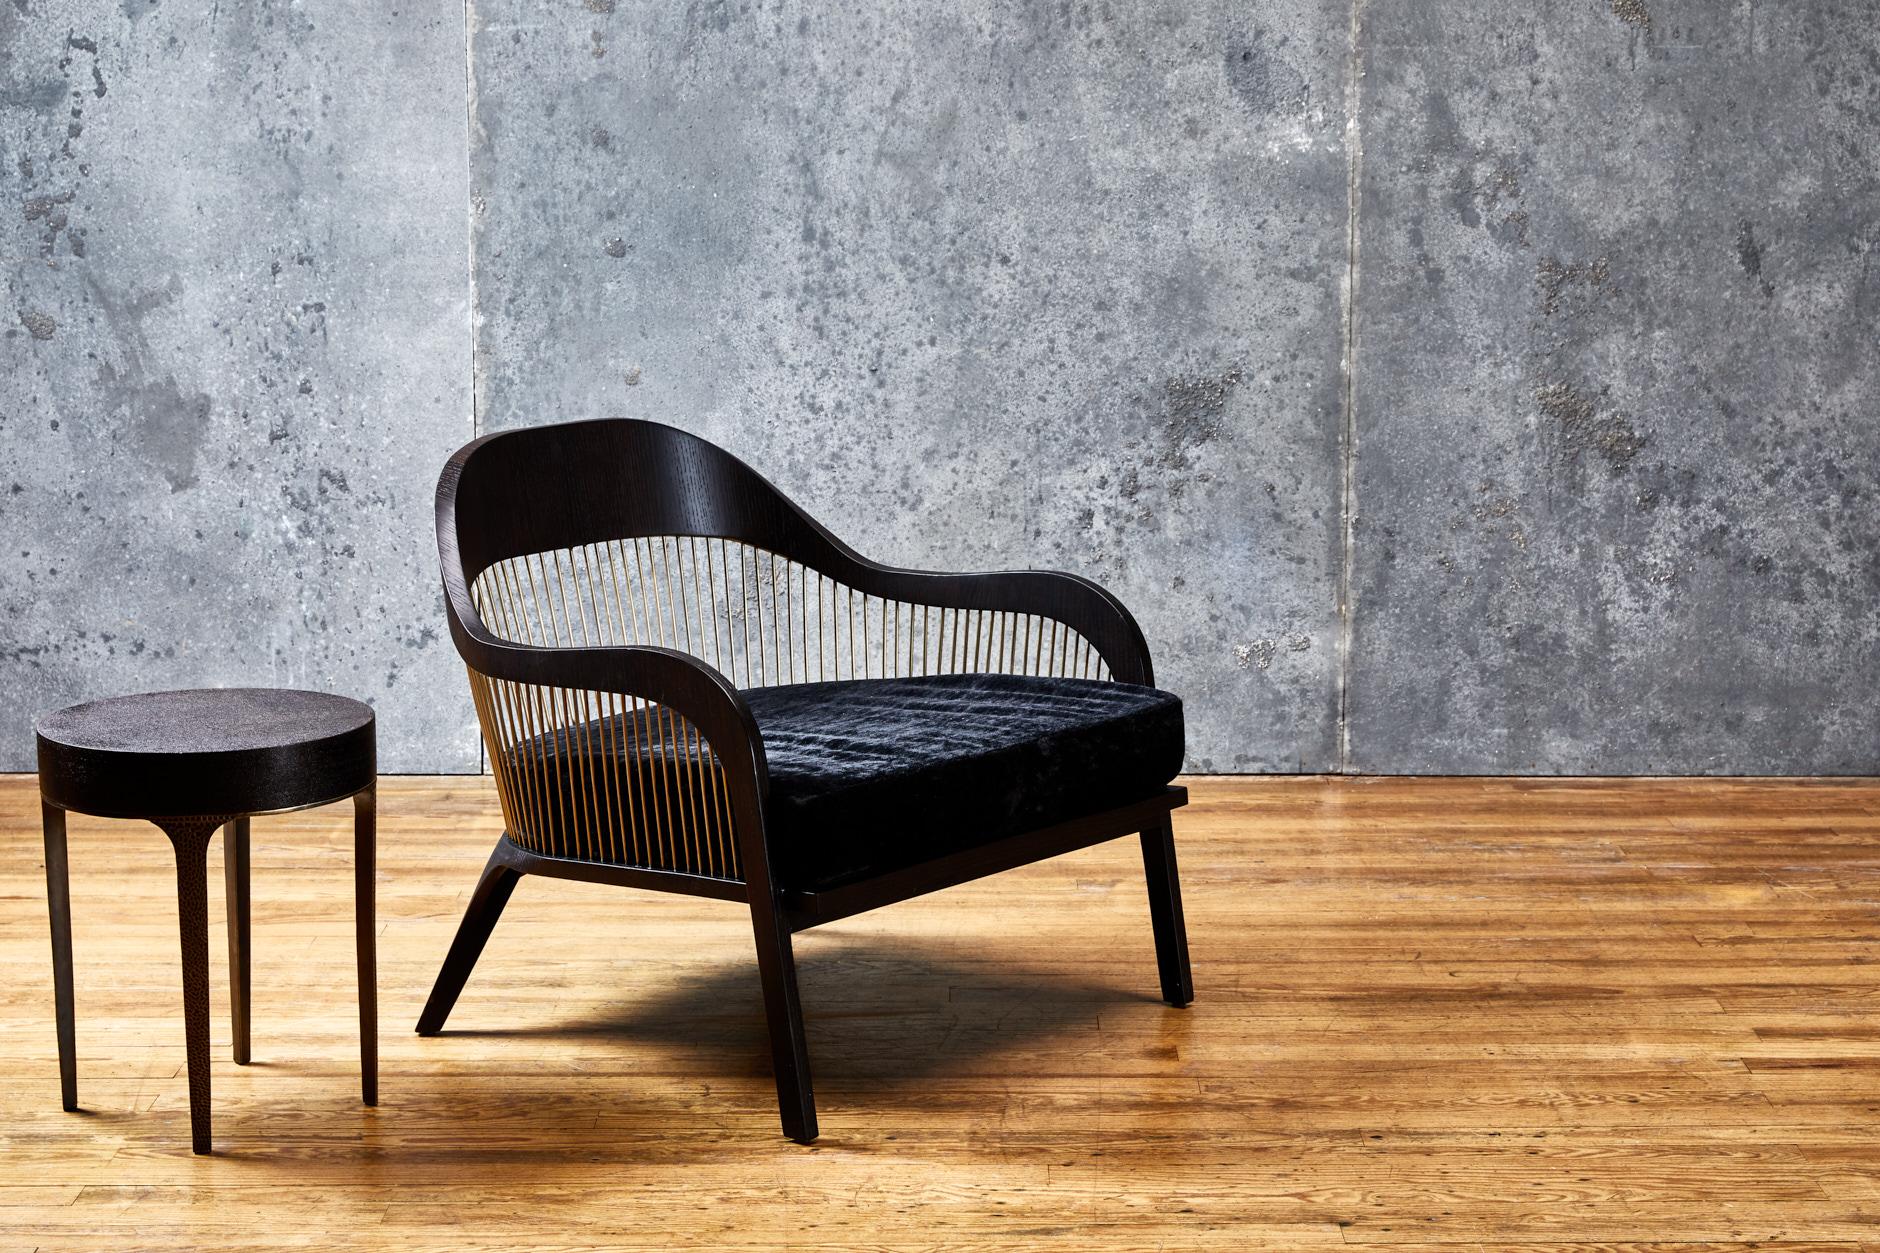 Modern Lanka Armchair, by Reda Amalou Design, 2015 -  Contemporary bergere seat For Sale